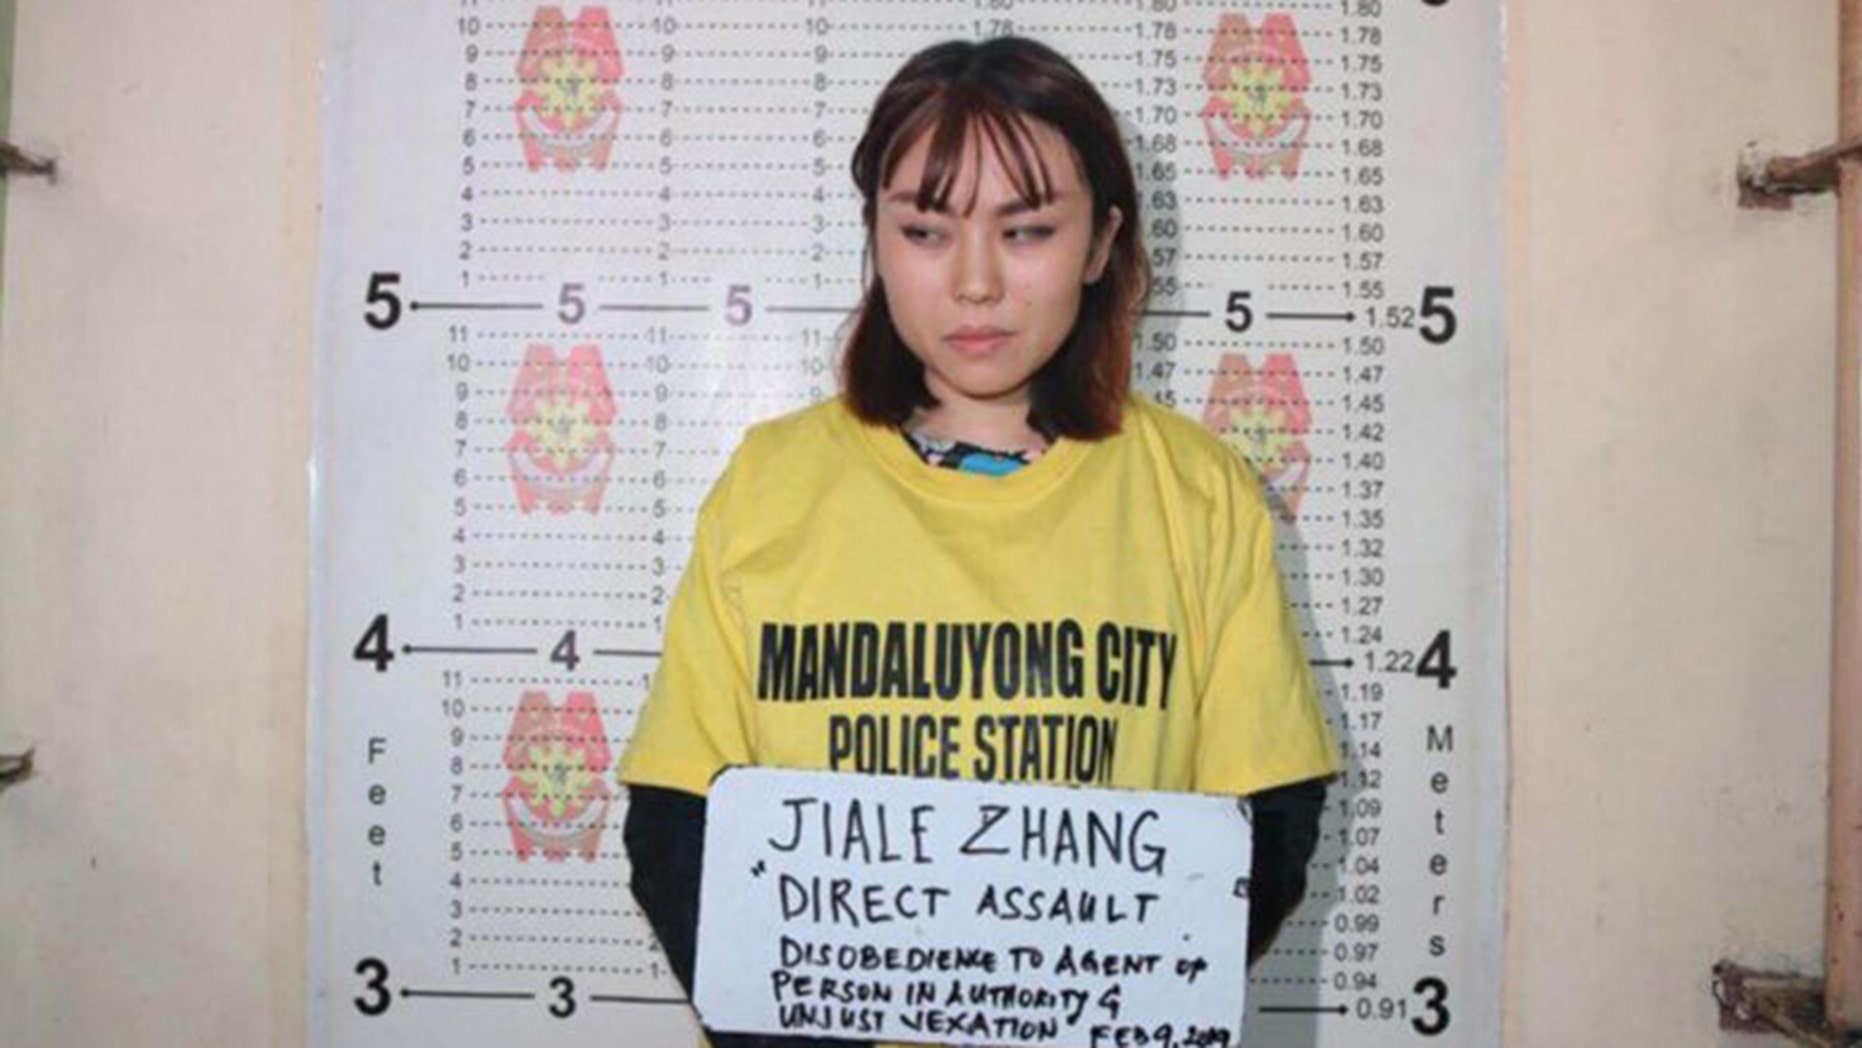 Chinese Woman Faces Deportation After Throwing Soybean Pudding At Philippine Police Officer